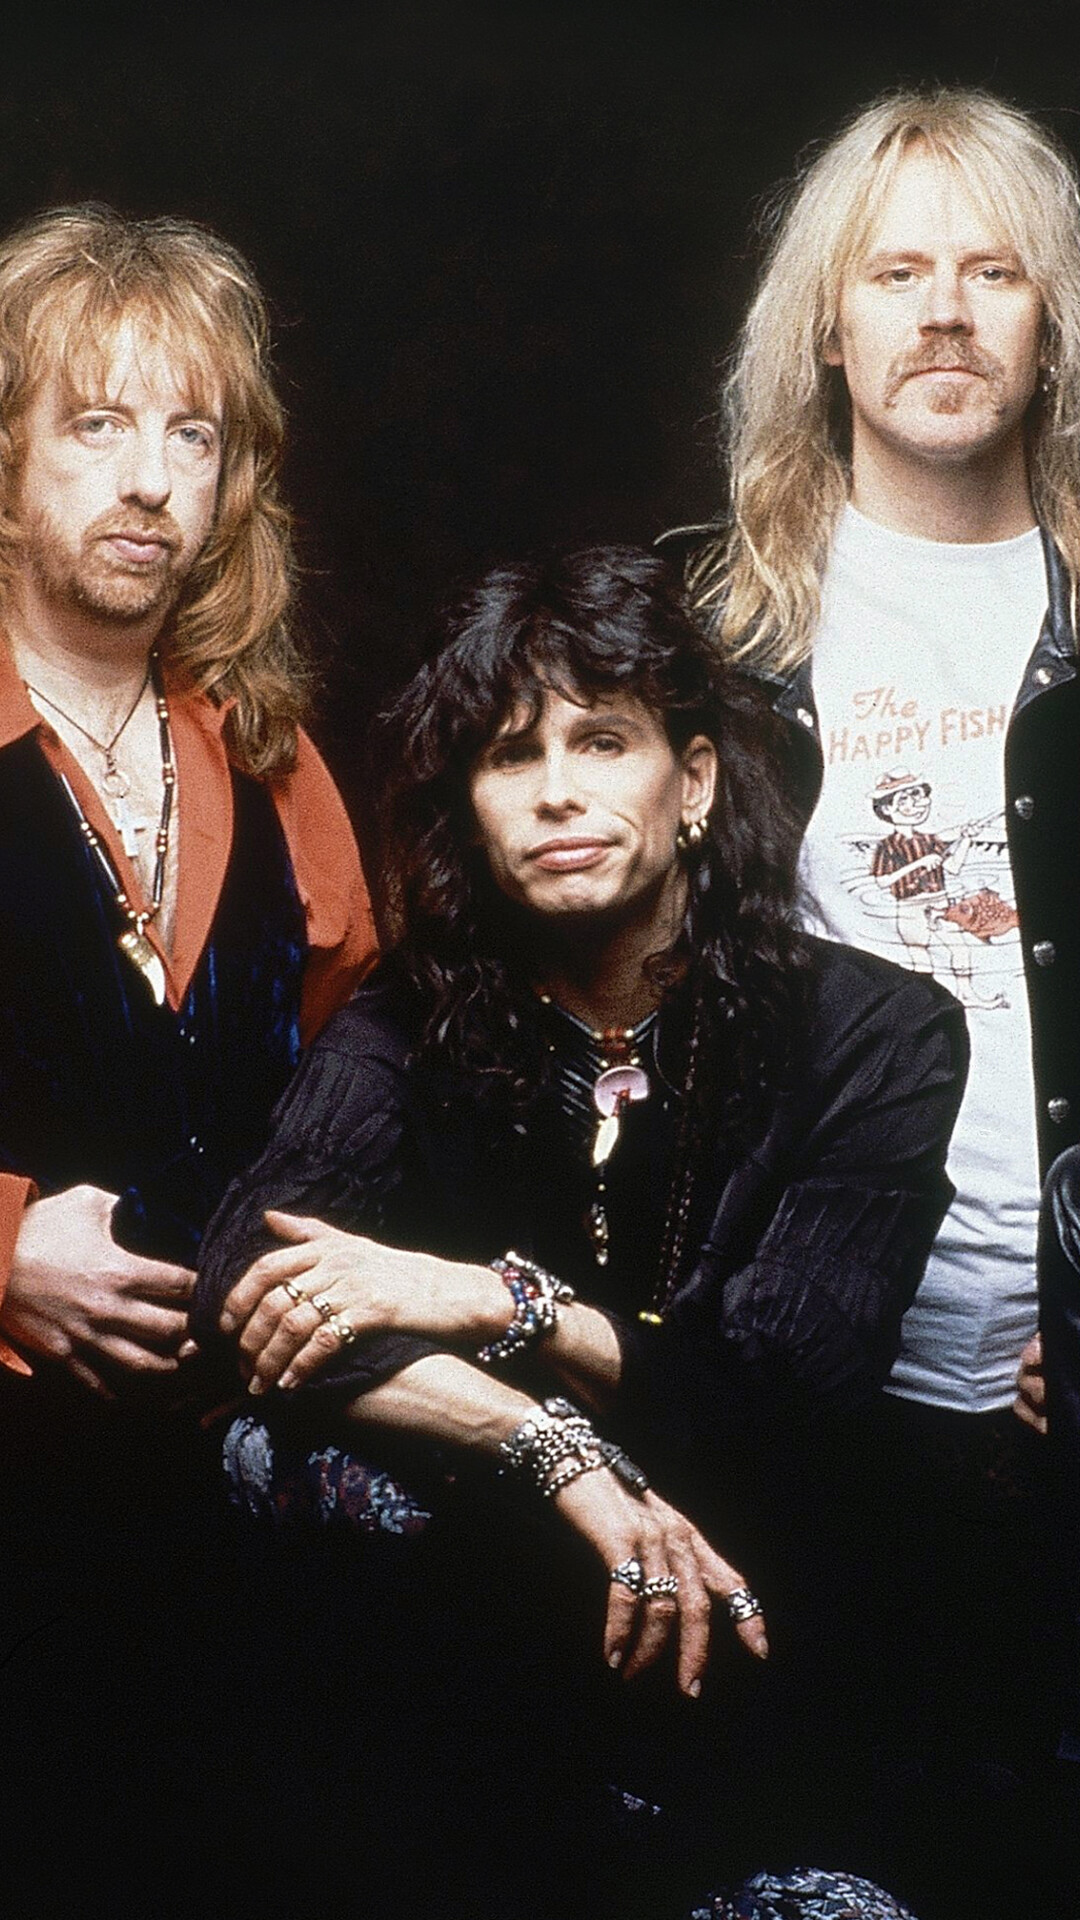 Aerosmith: The band was inducted into the Rock and Roll Hall of Fame in 2001. 1080x1920 Full HD Wallpaper.